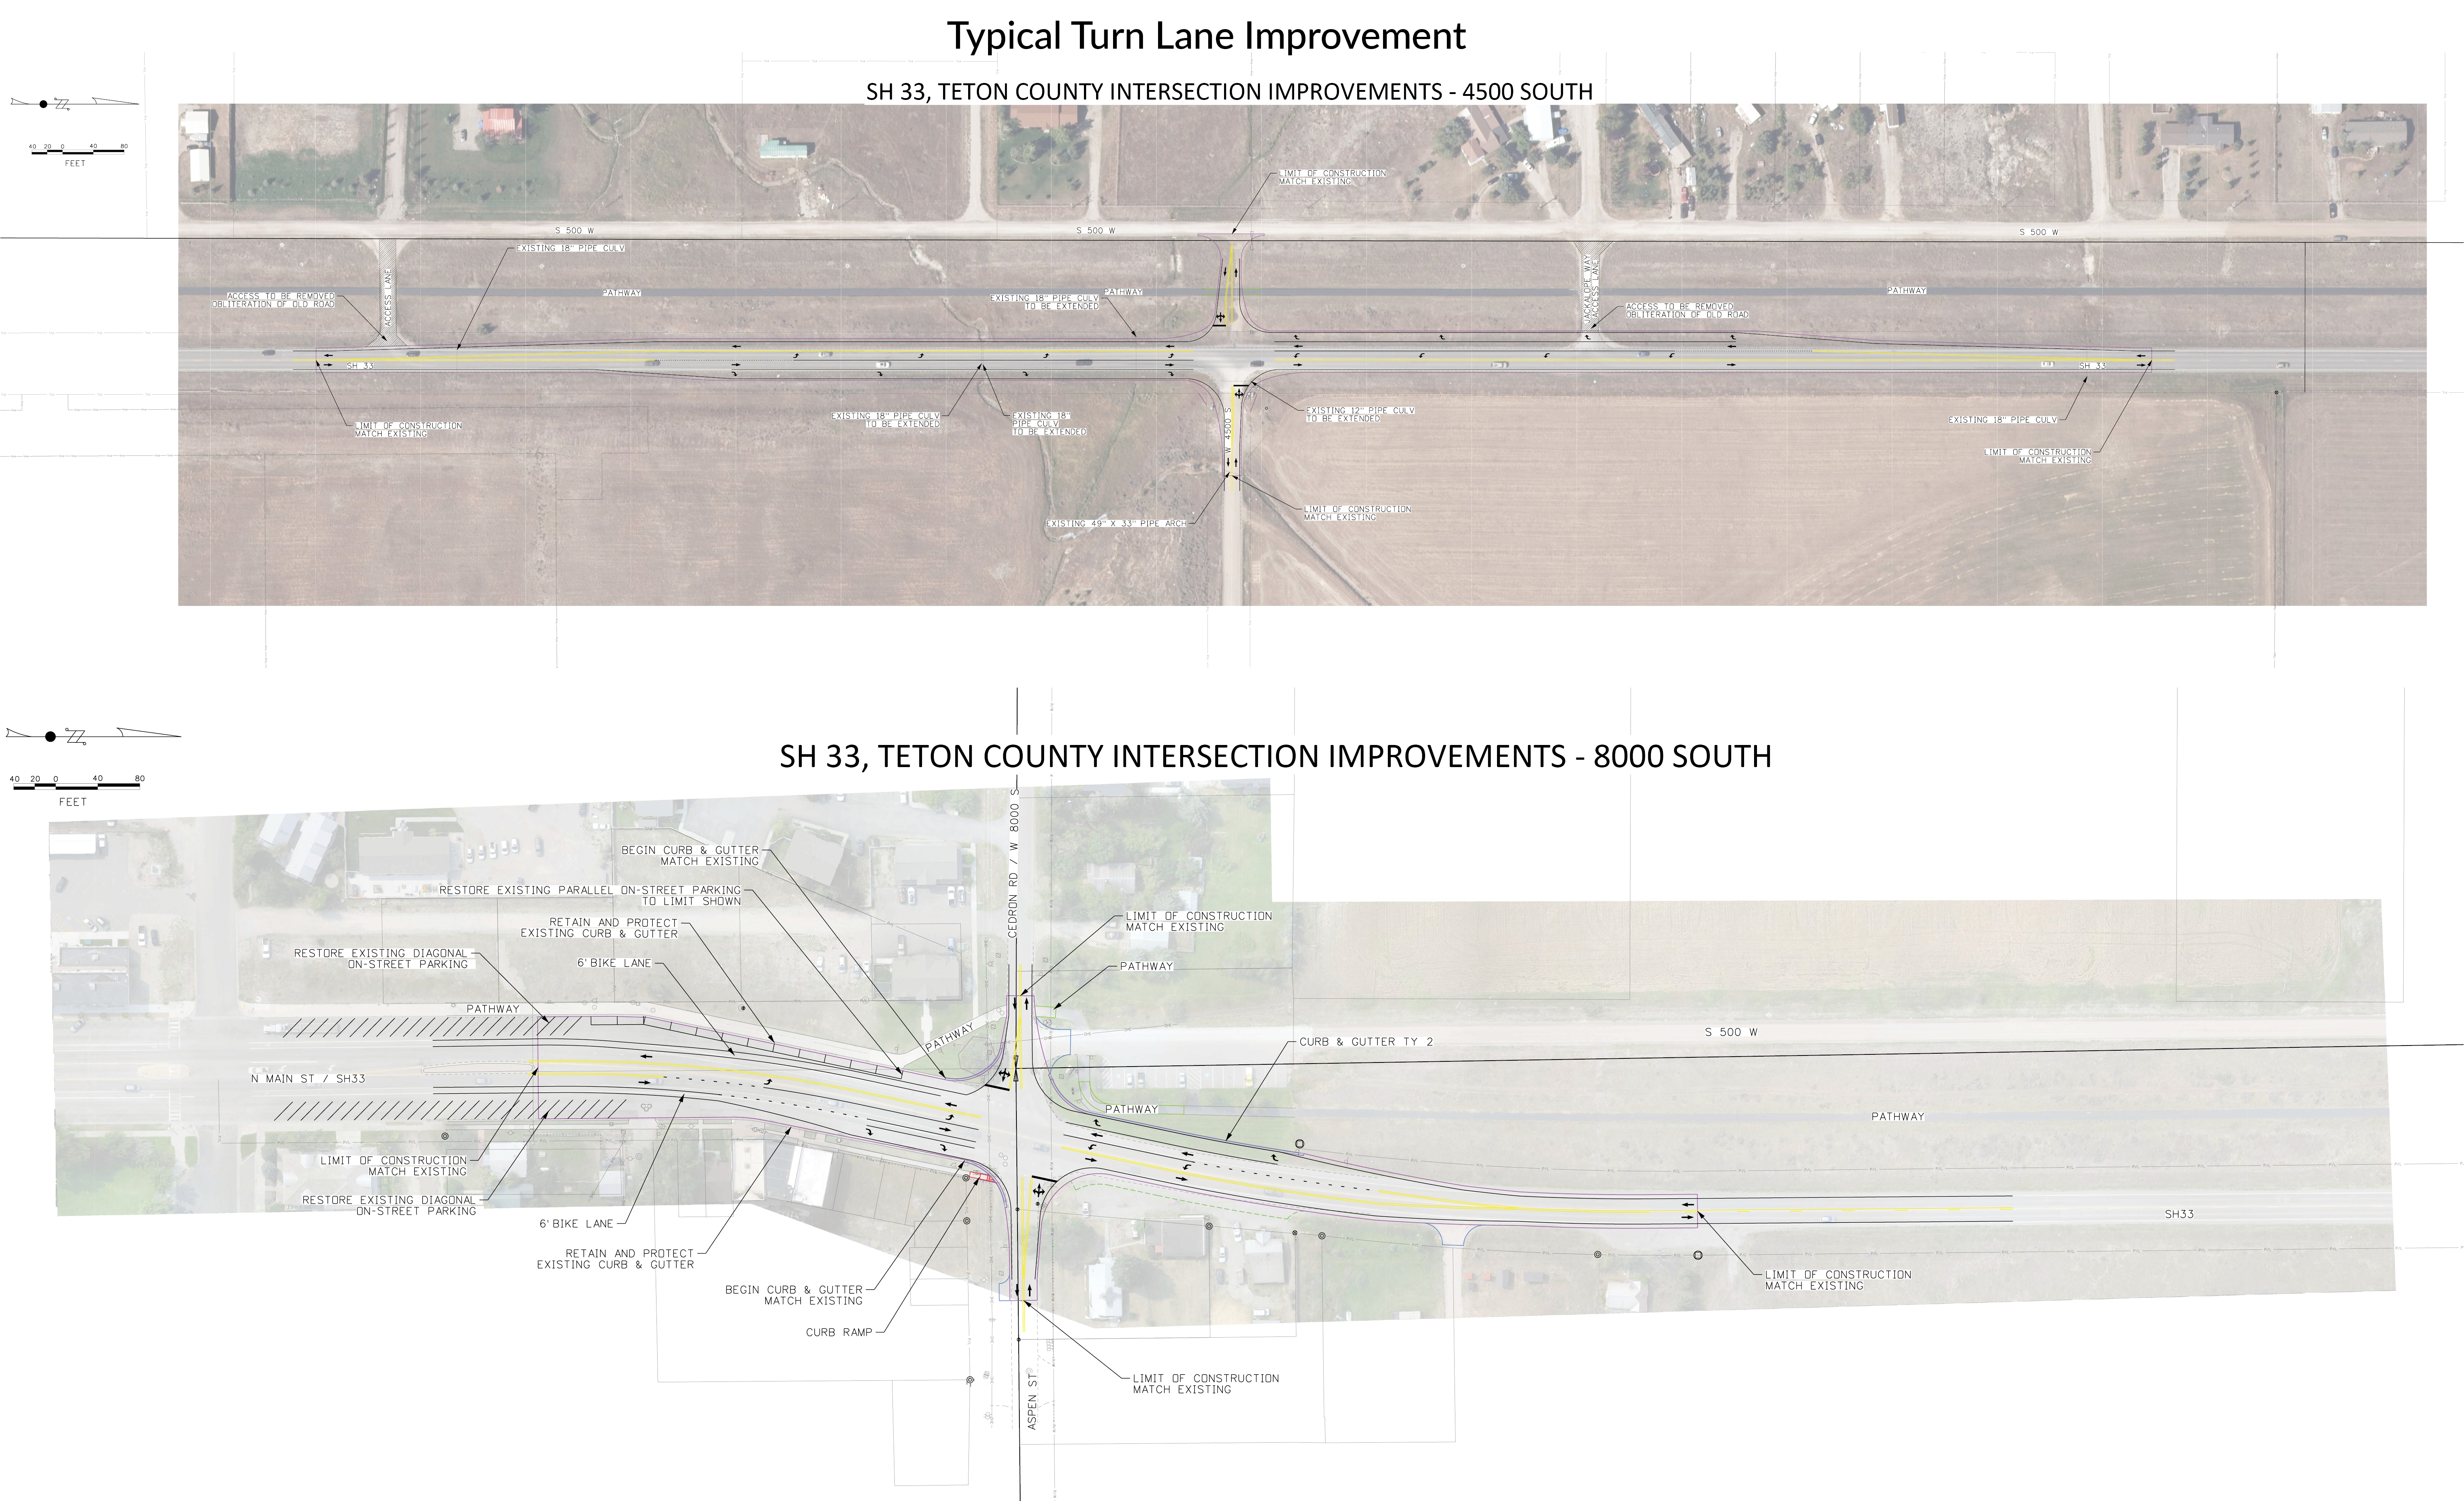 Typical Turn Lane improvements along ID-33 and 4500 South.